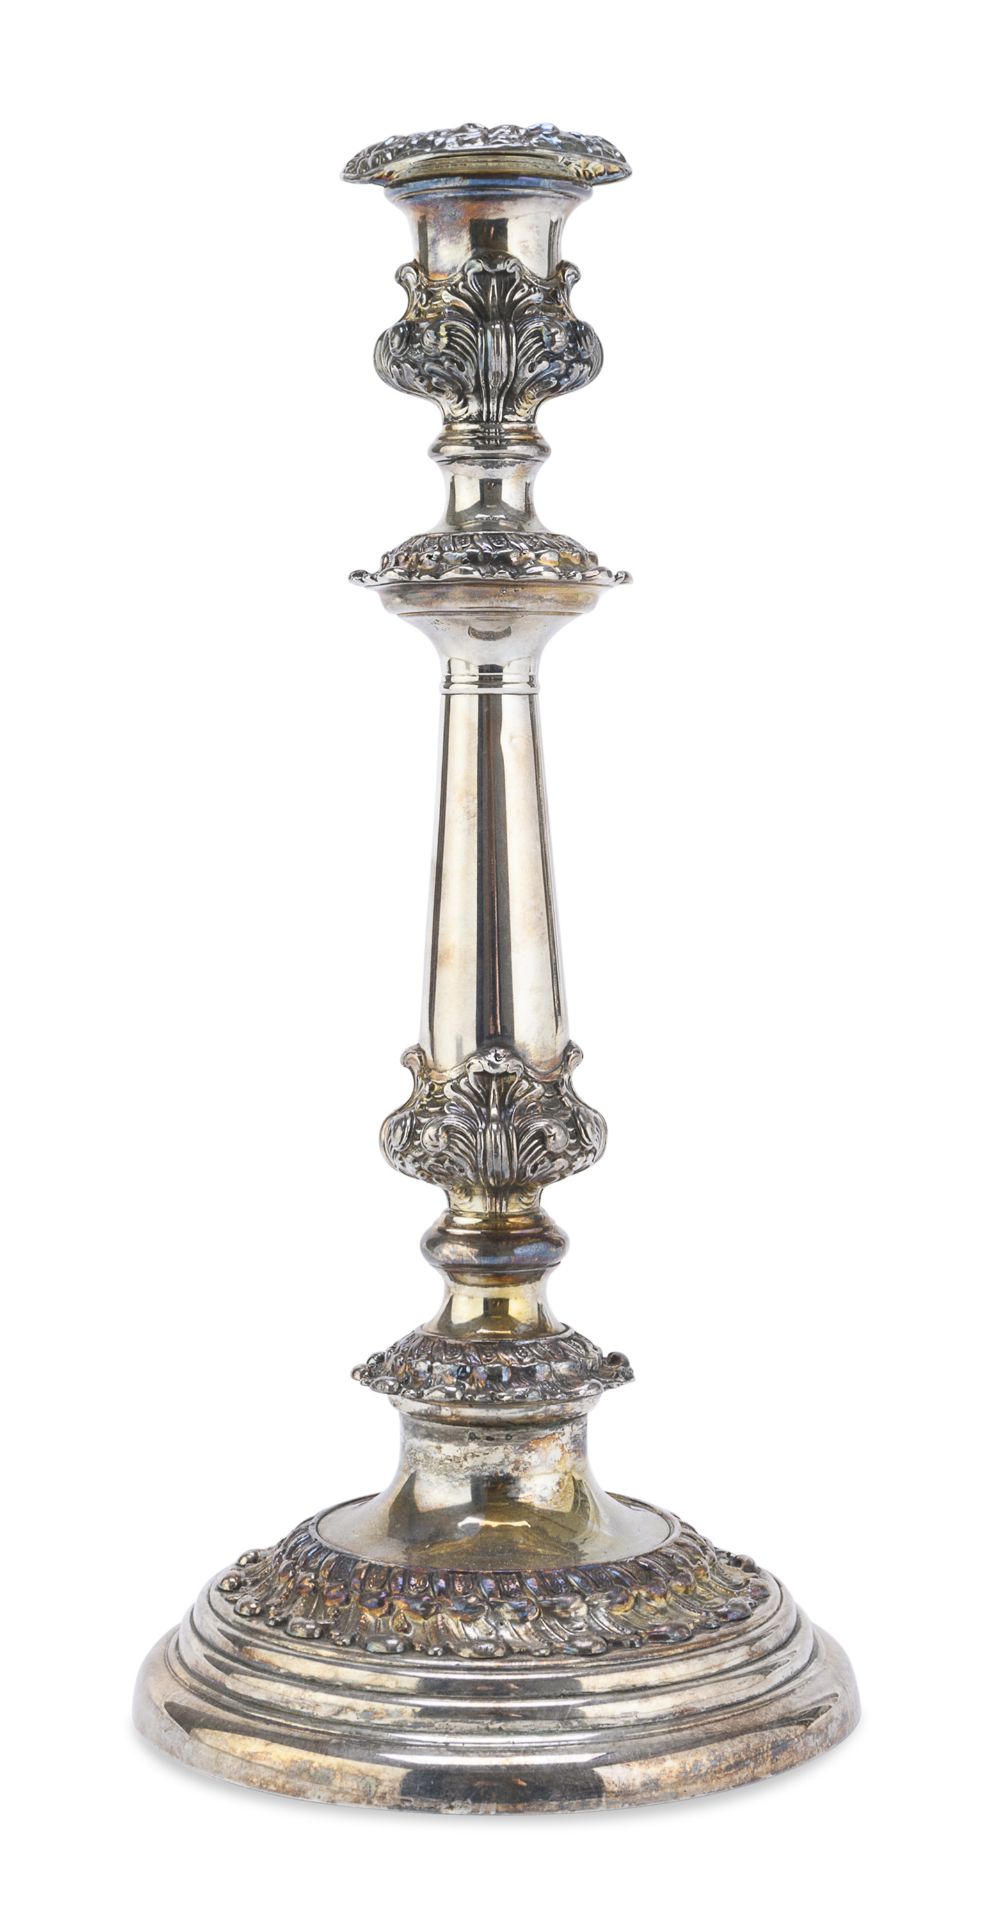 SILVER-PLATED CANDLESTICK EARLY 20TH CENTURY